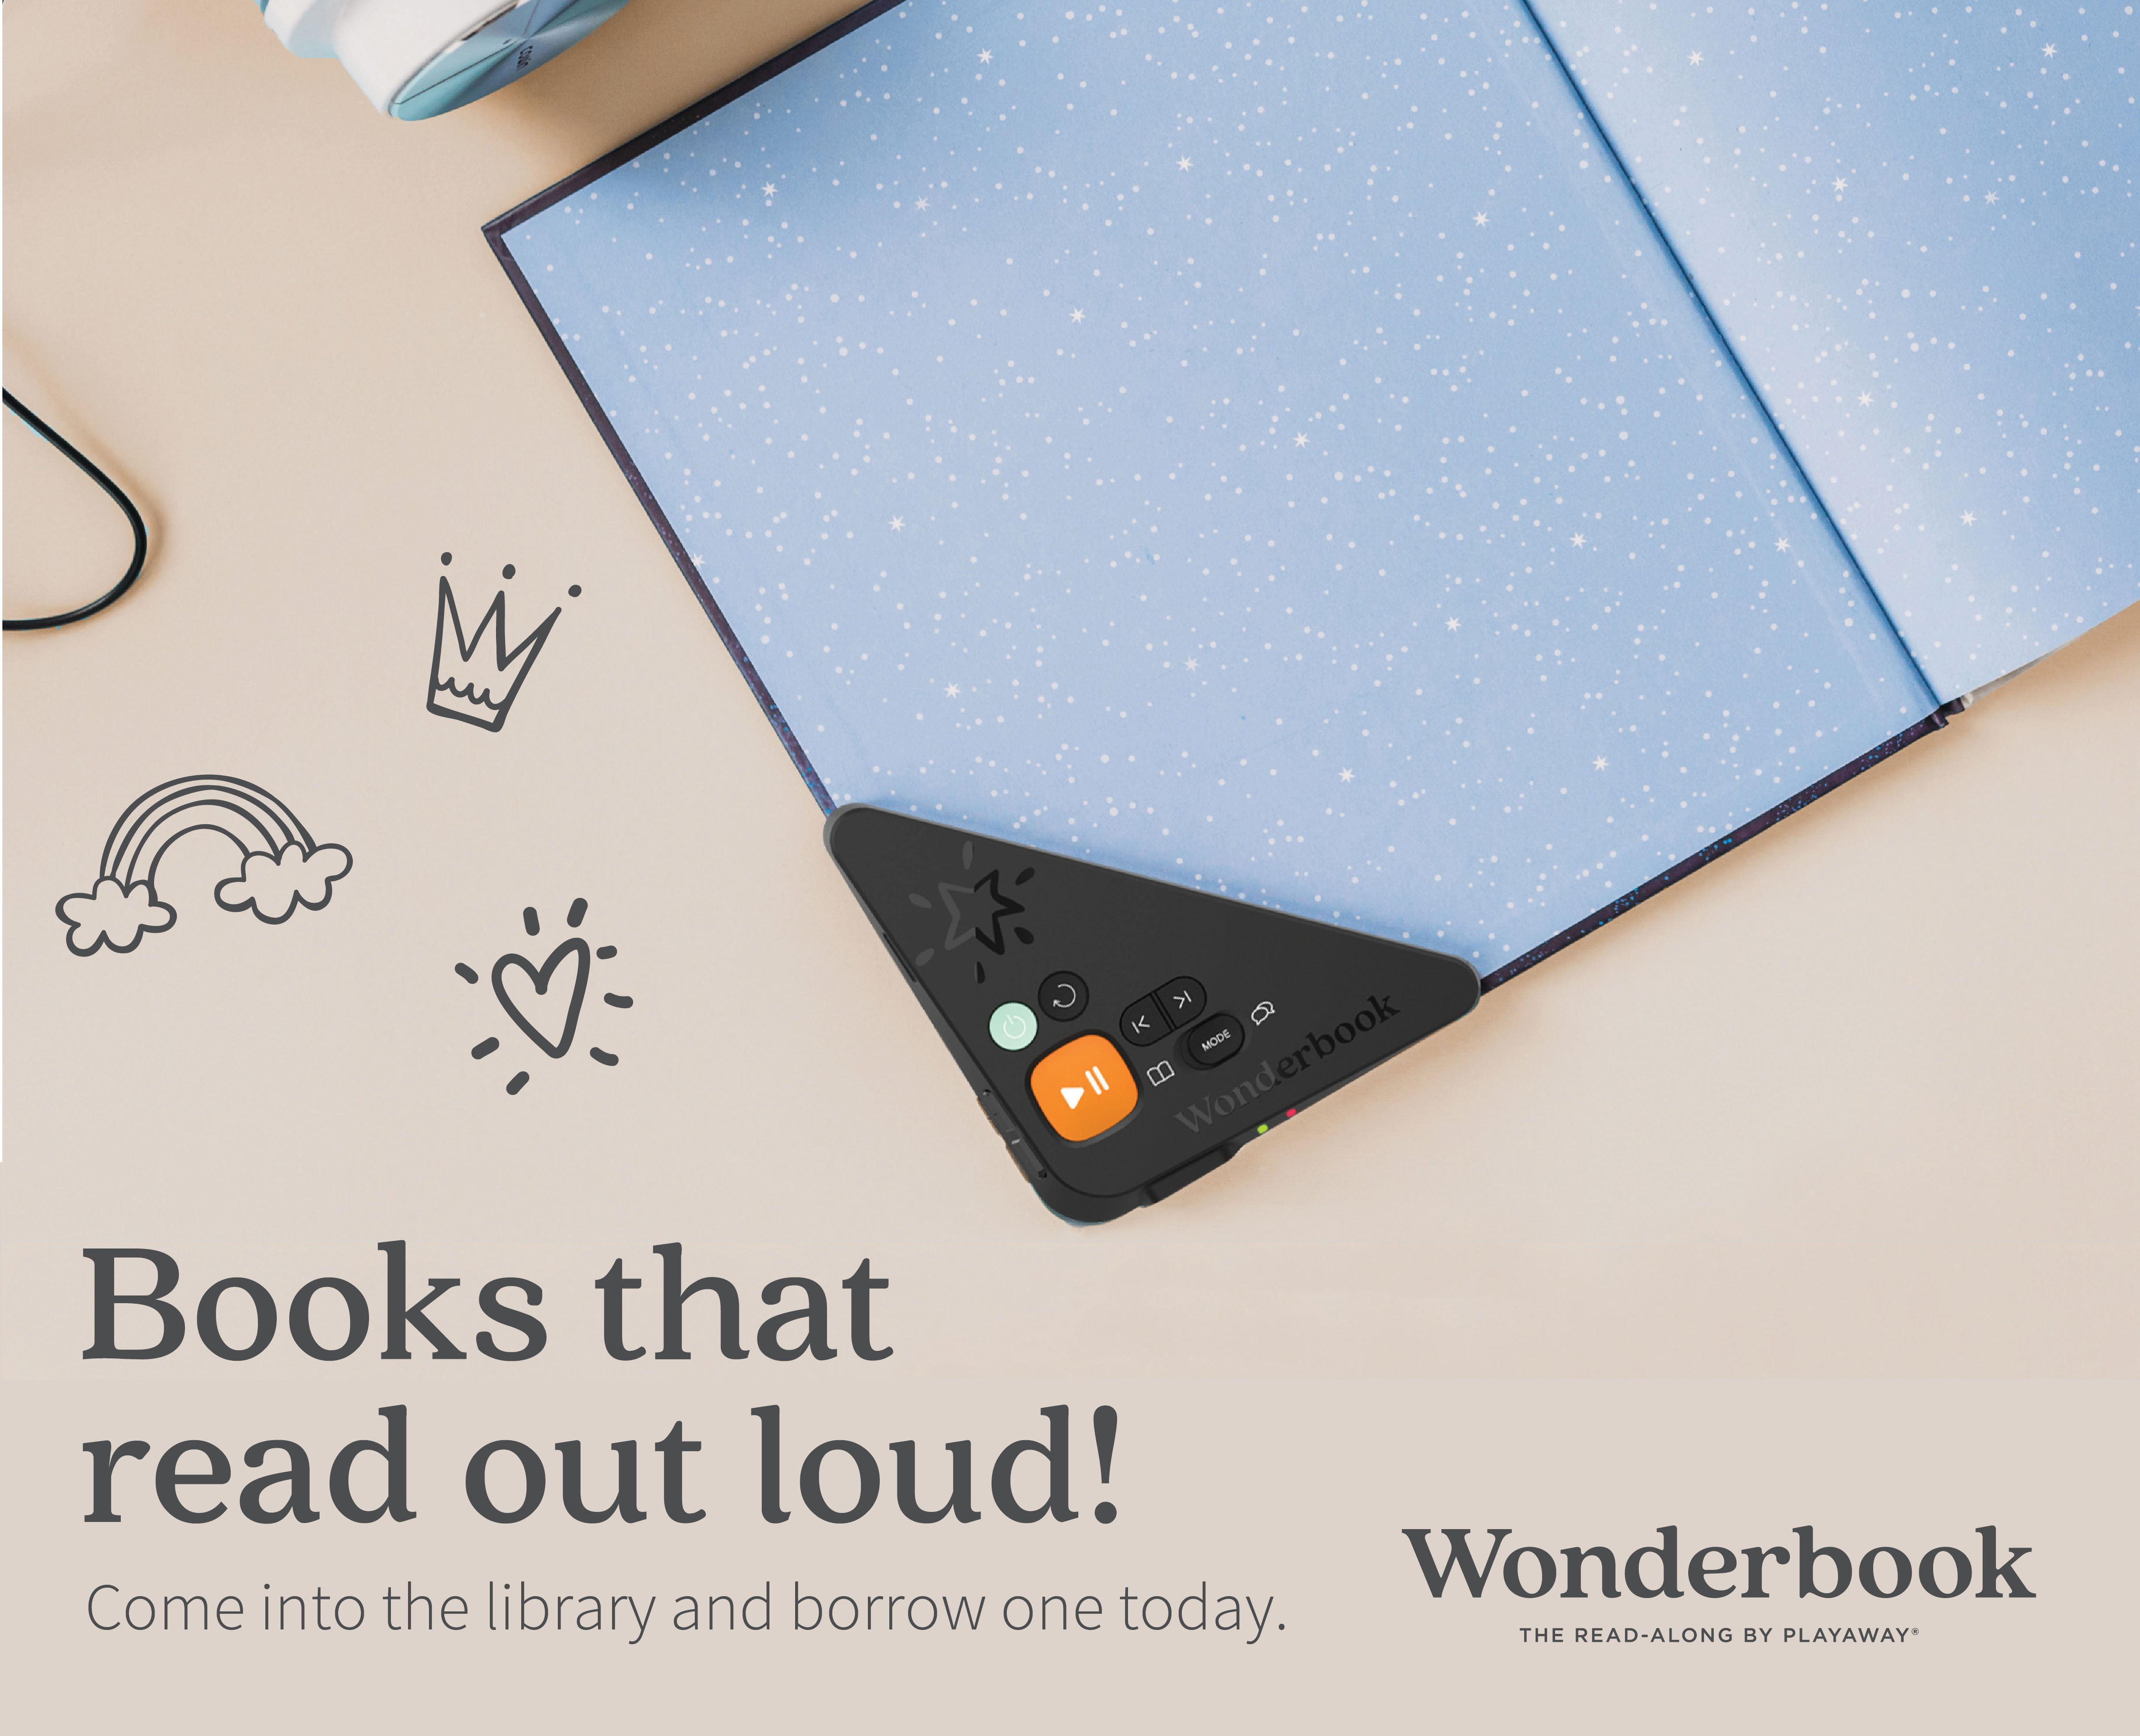 Cover of a Wonderbook